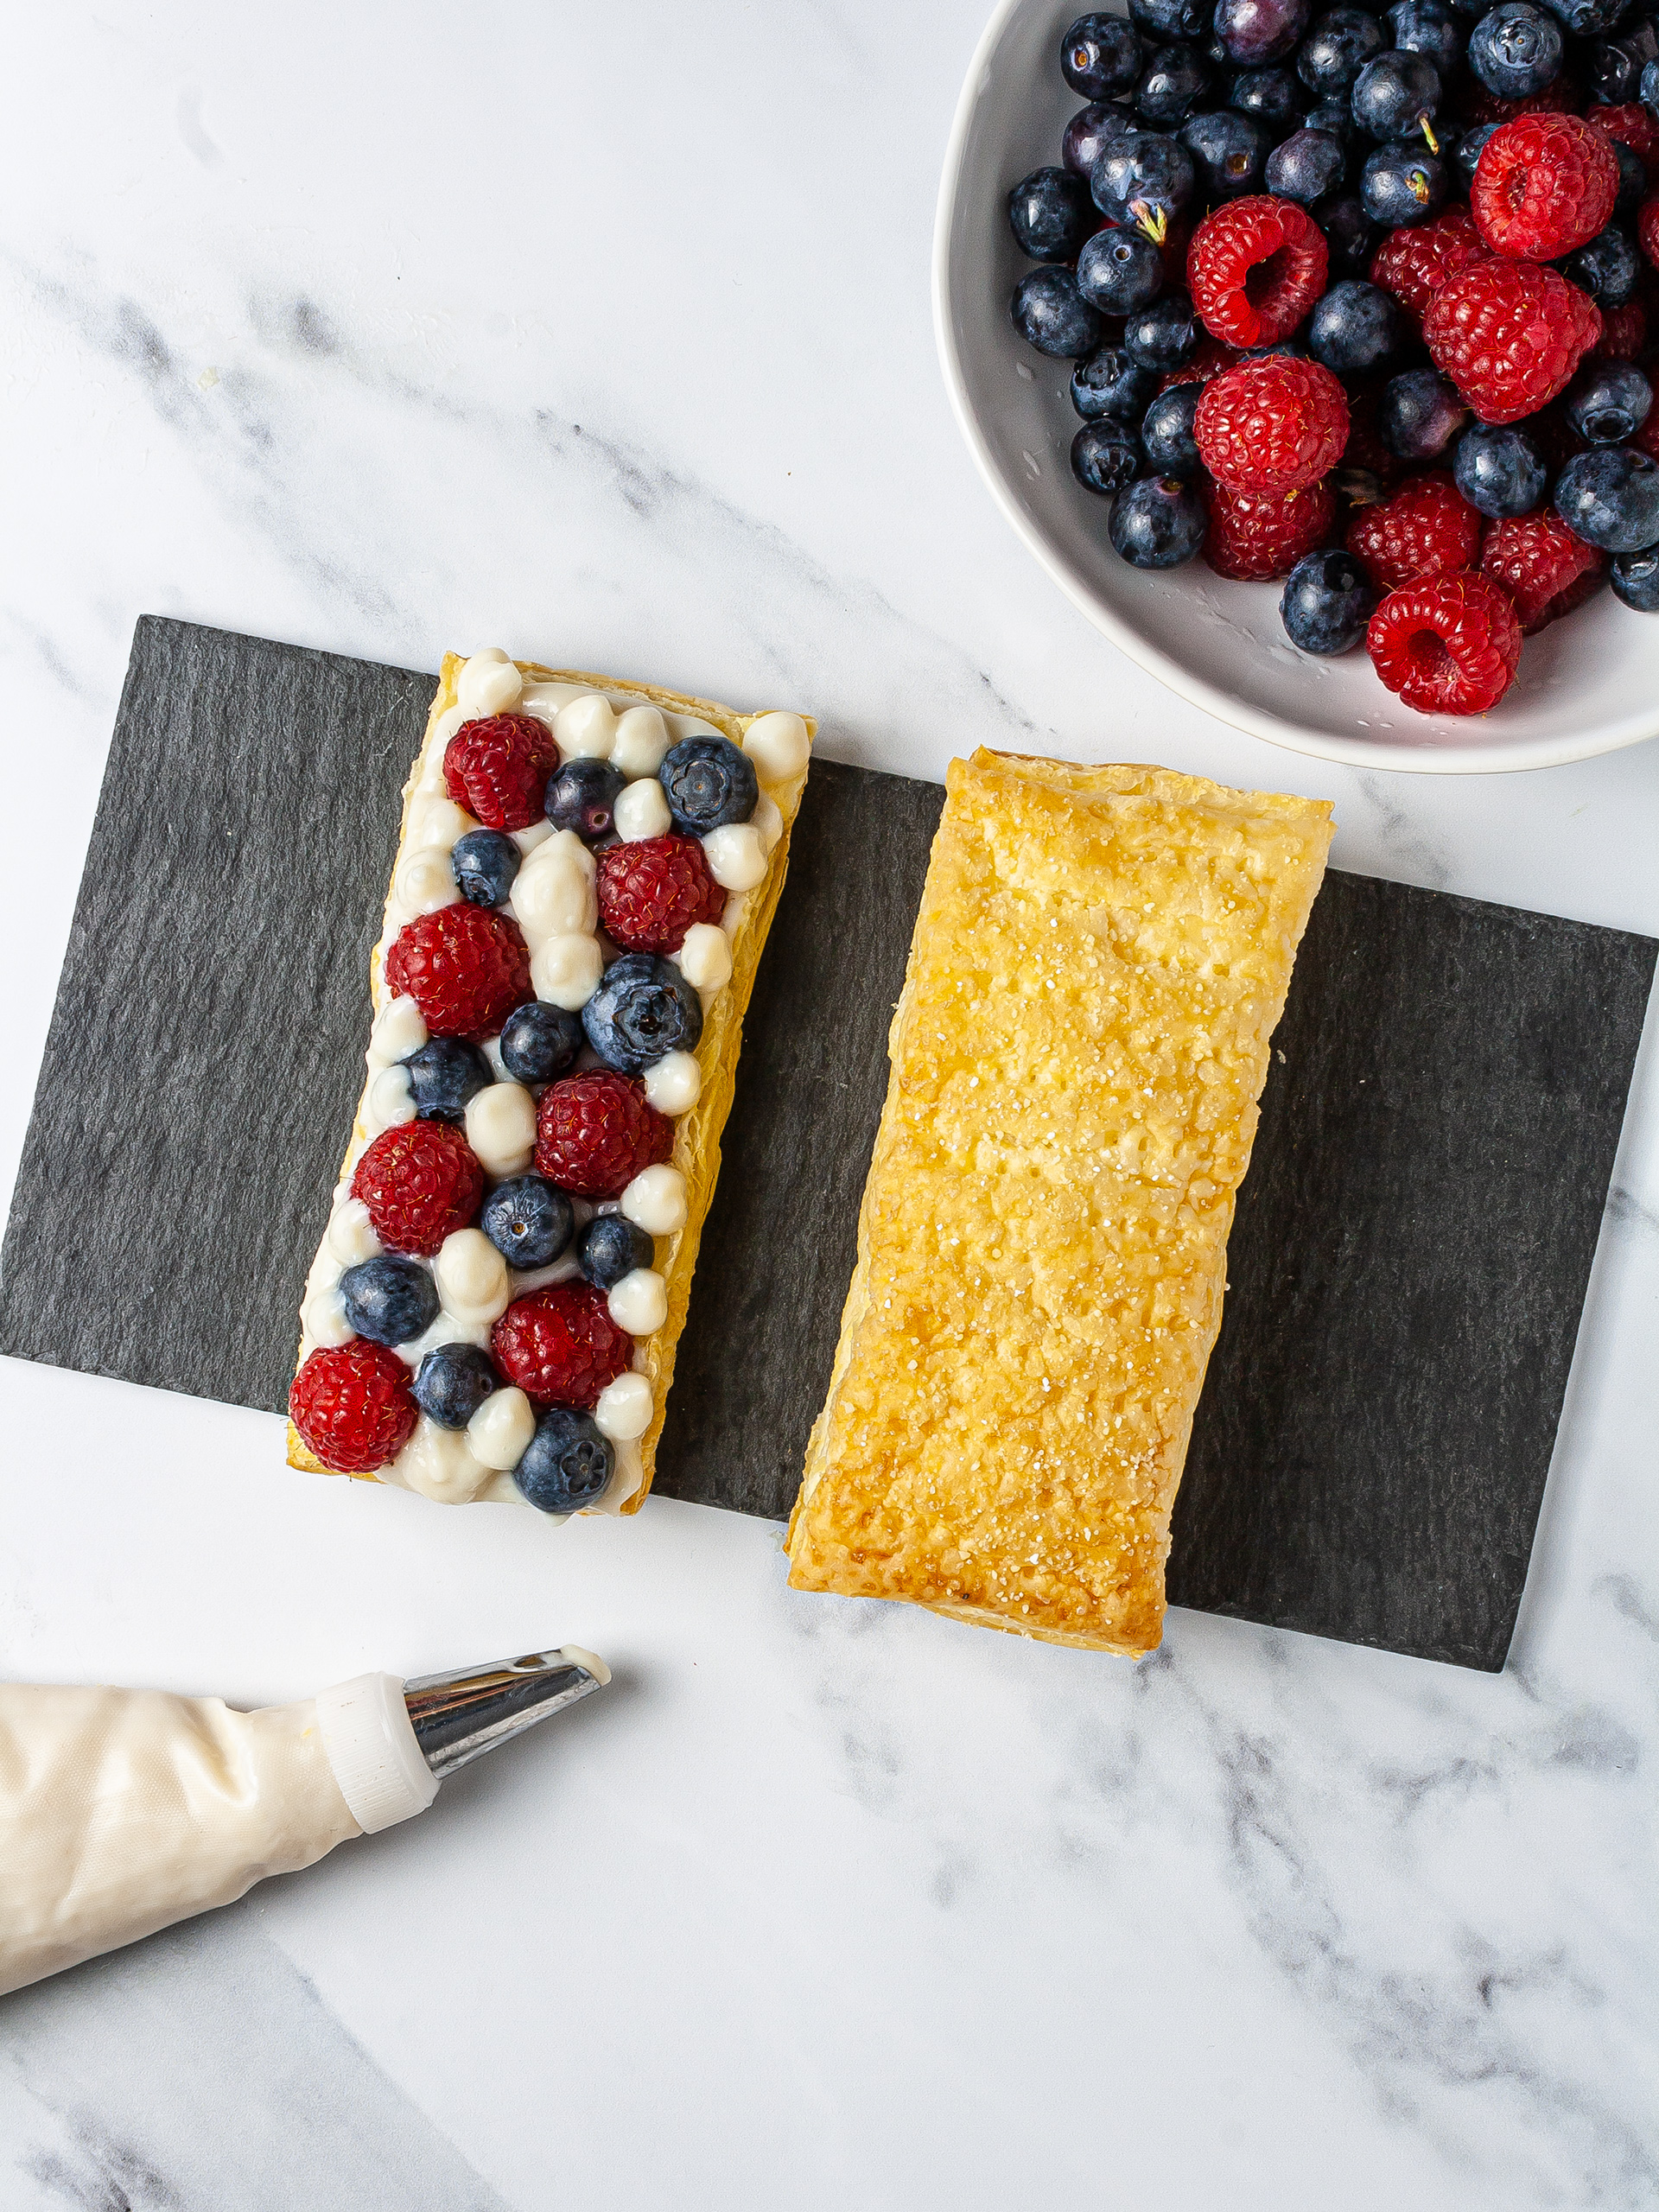 Puff pastry with almond cream, blueberries, and raspberries